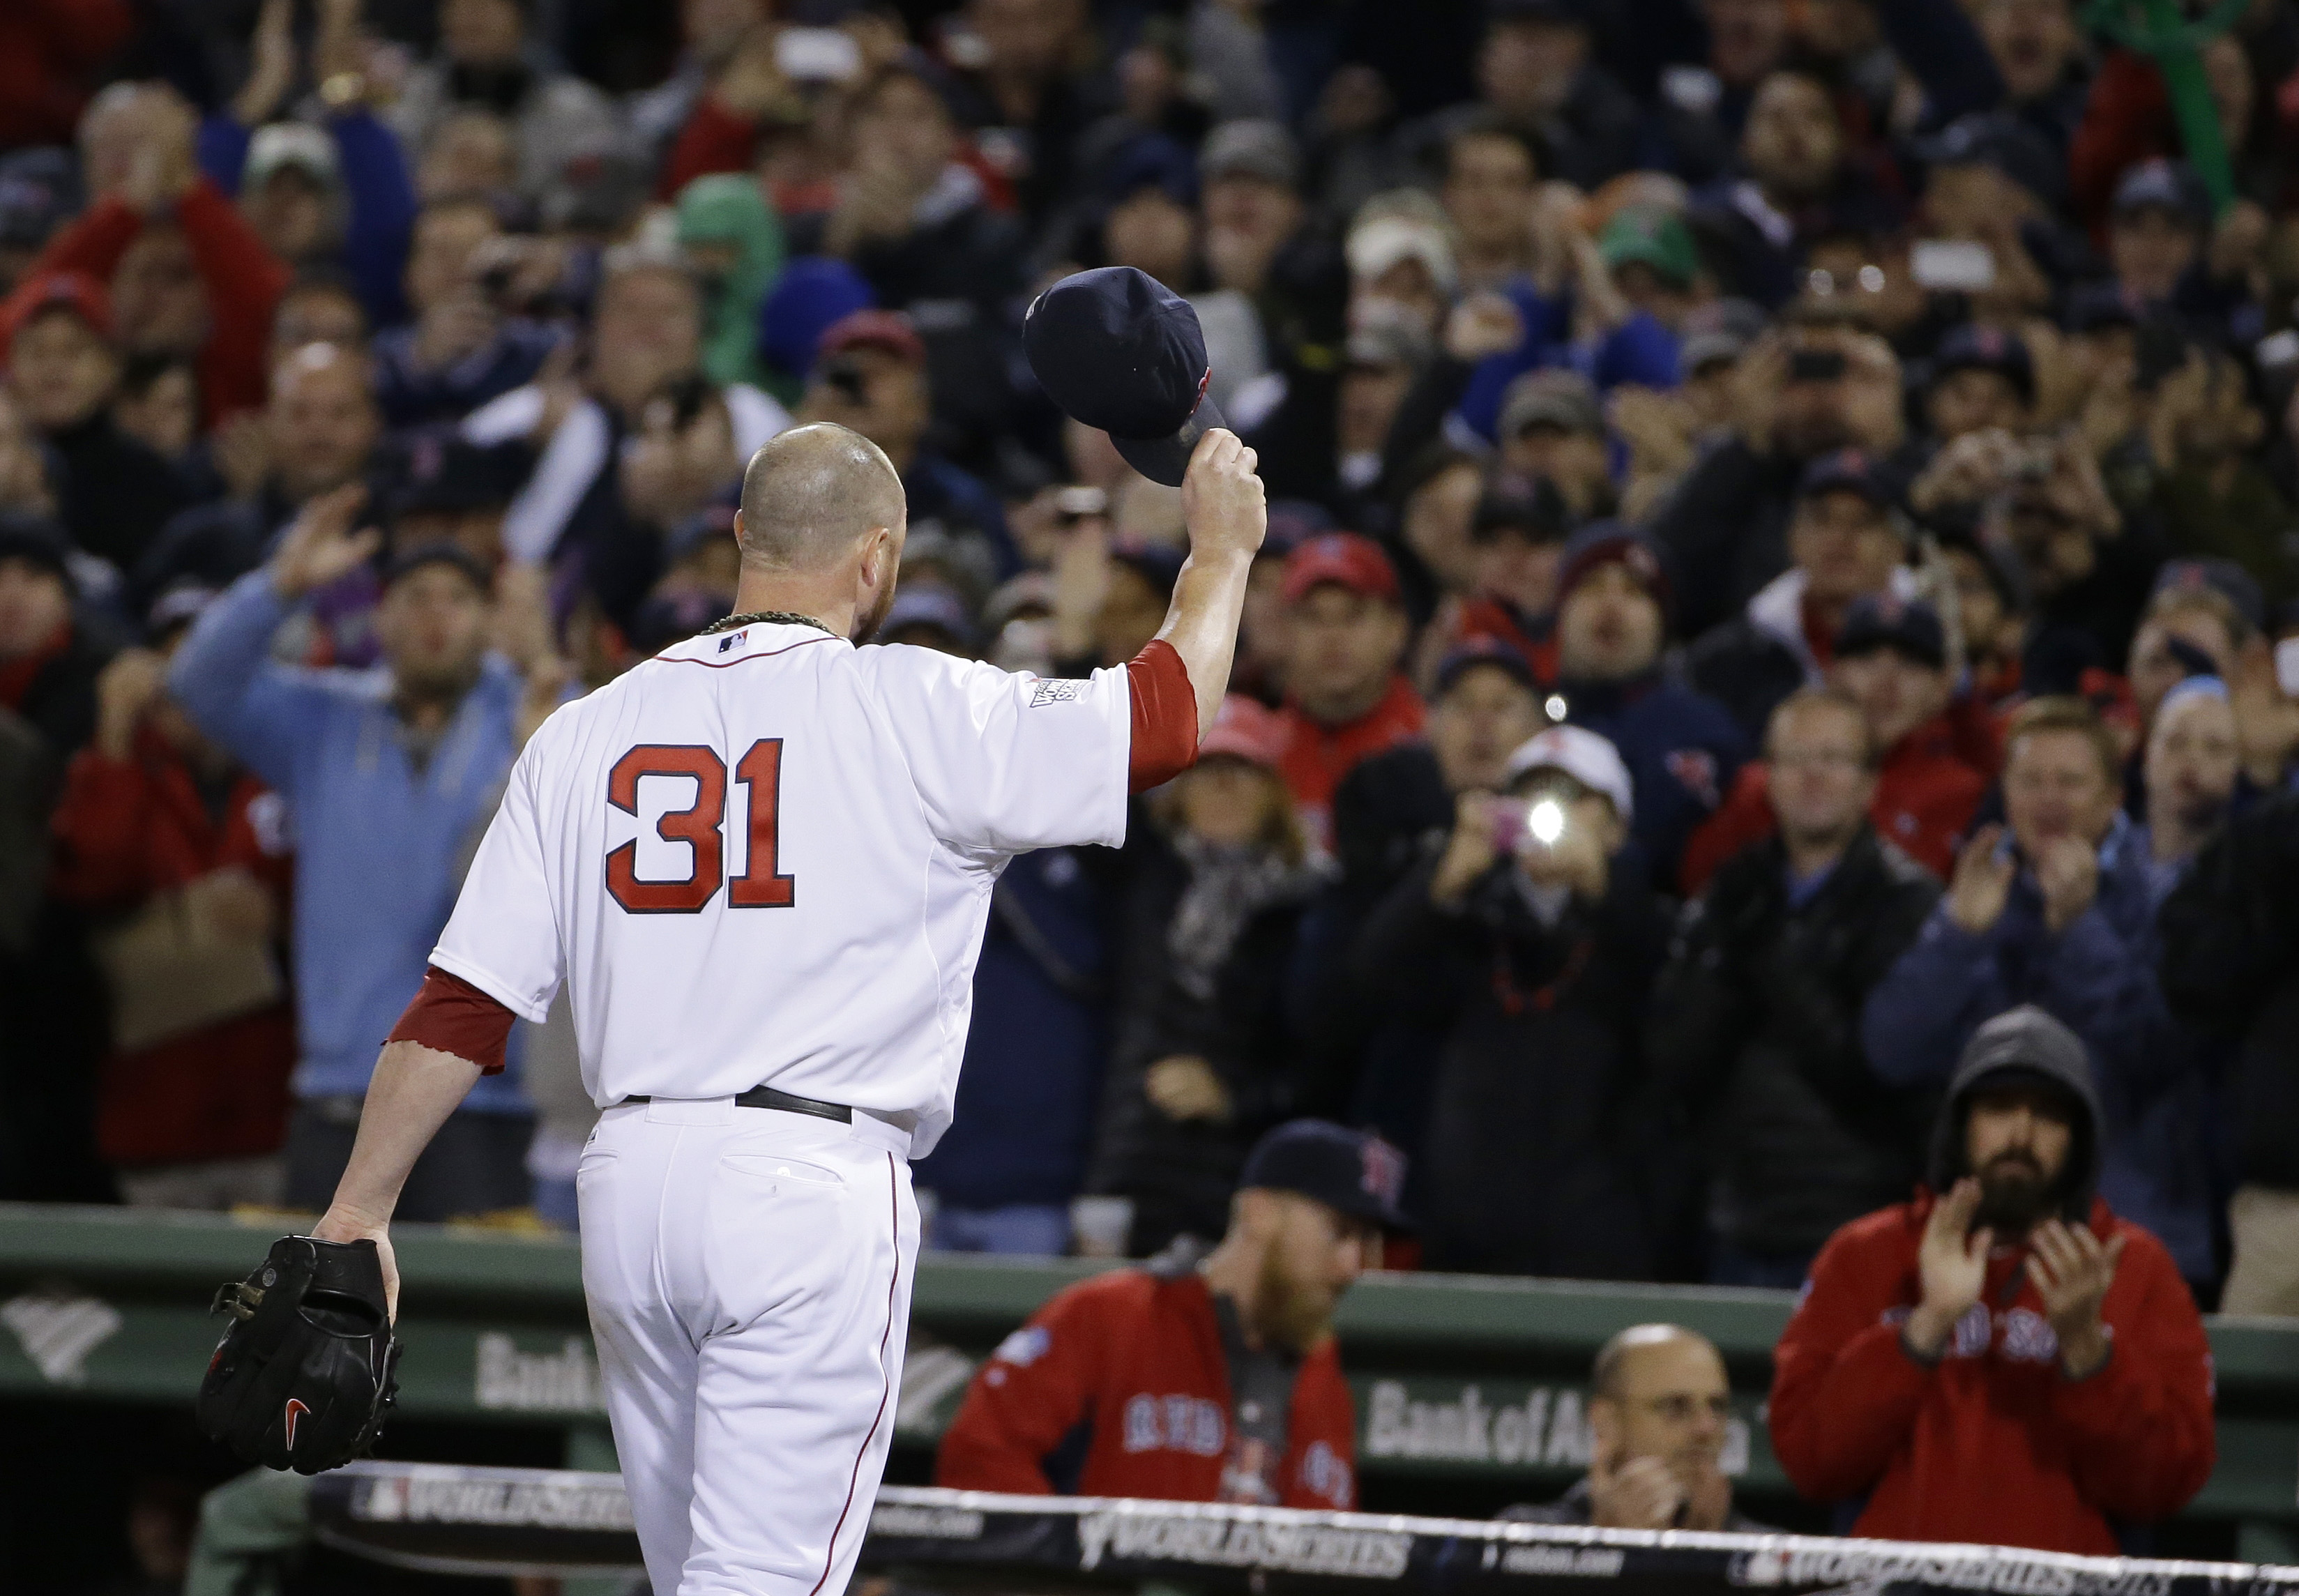 Longtime Red Sox ace Jon Lester retires after 16 seasons